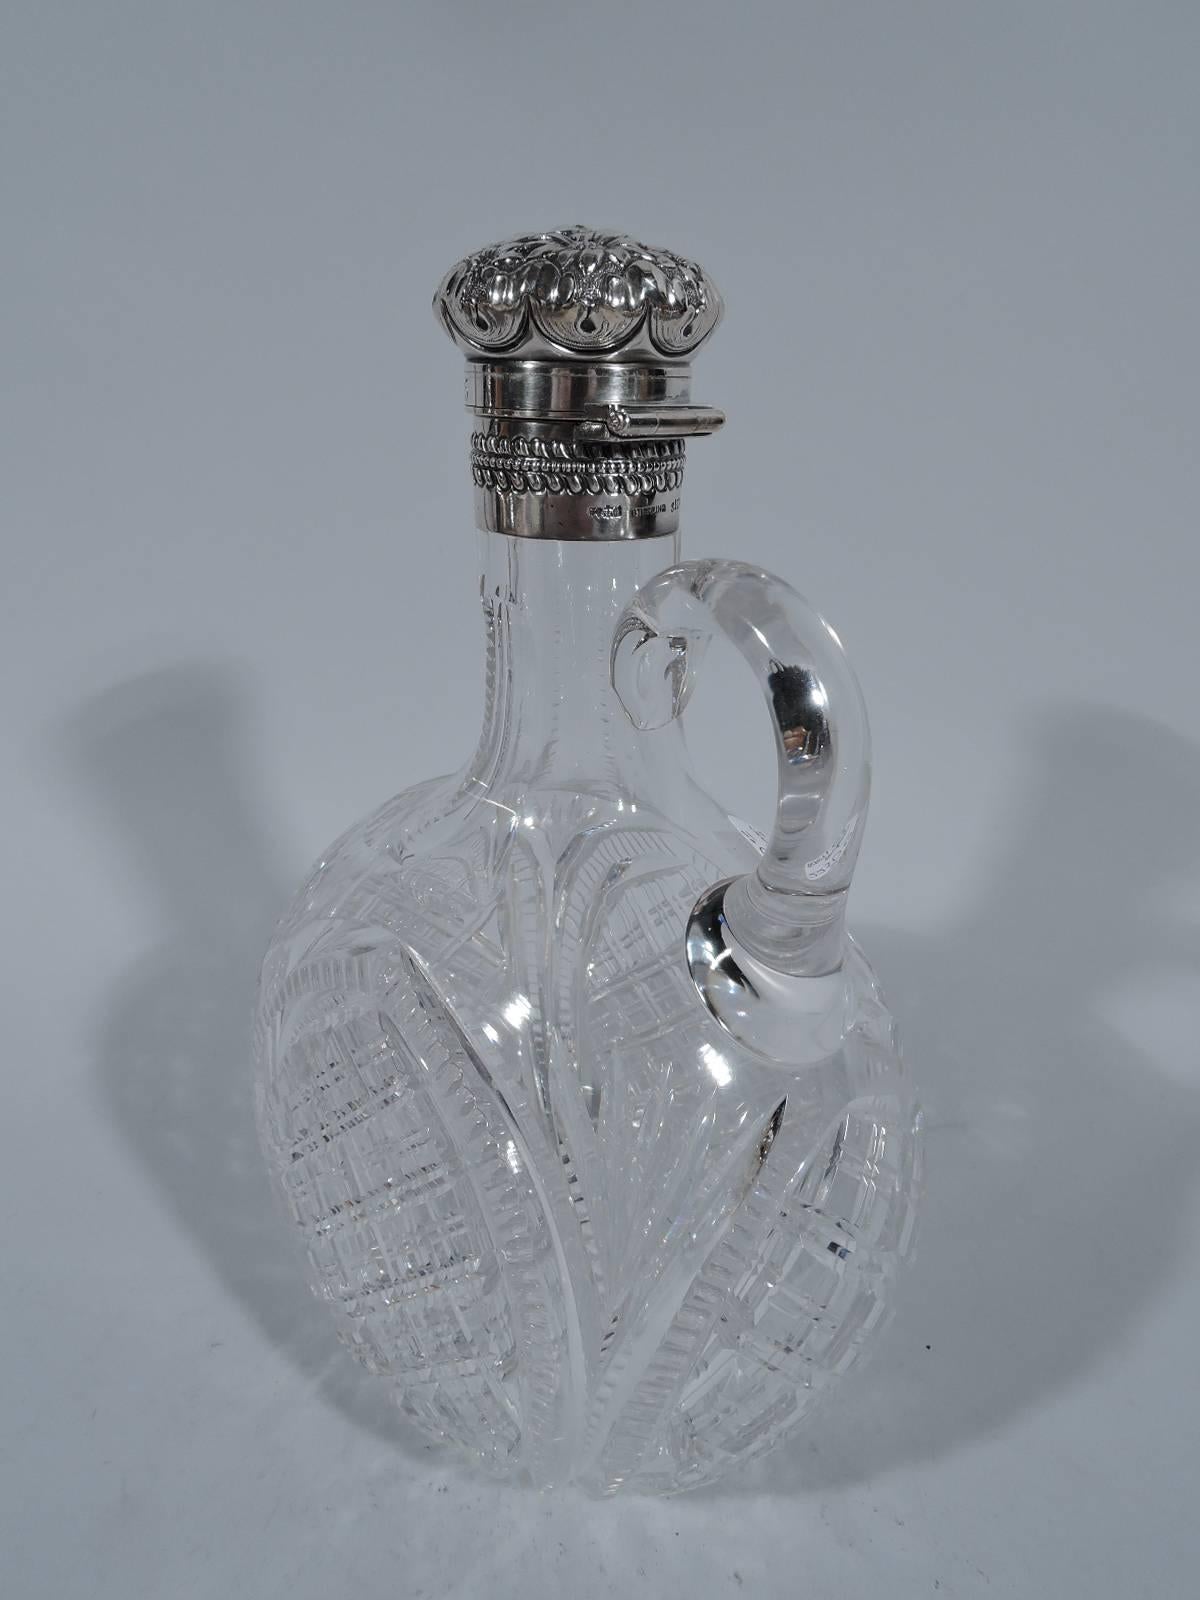 Brilliant-cut-glass and sterling silver decanter. Made by Gorham in Providence in 1894. Round body with thumb ring handle. Cut ornament in arched frames. Collar silver as is hinged and cork-lined cover with floral repousse. On cover is engraved